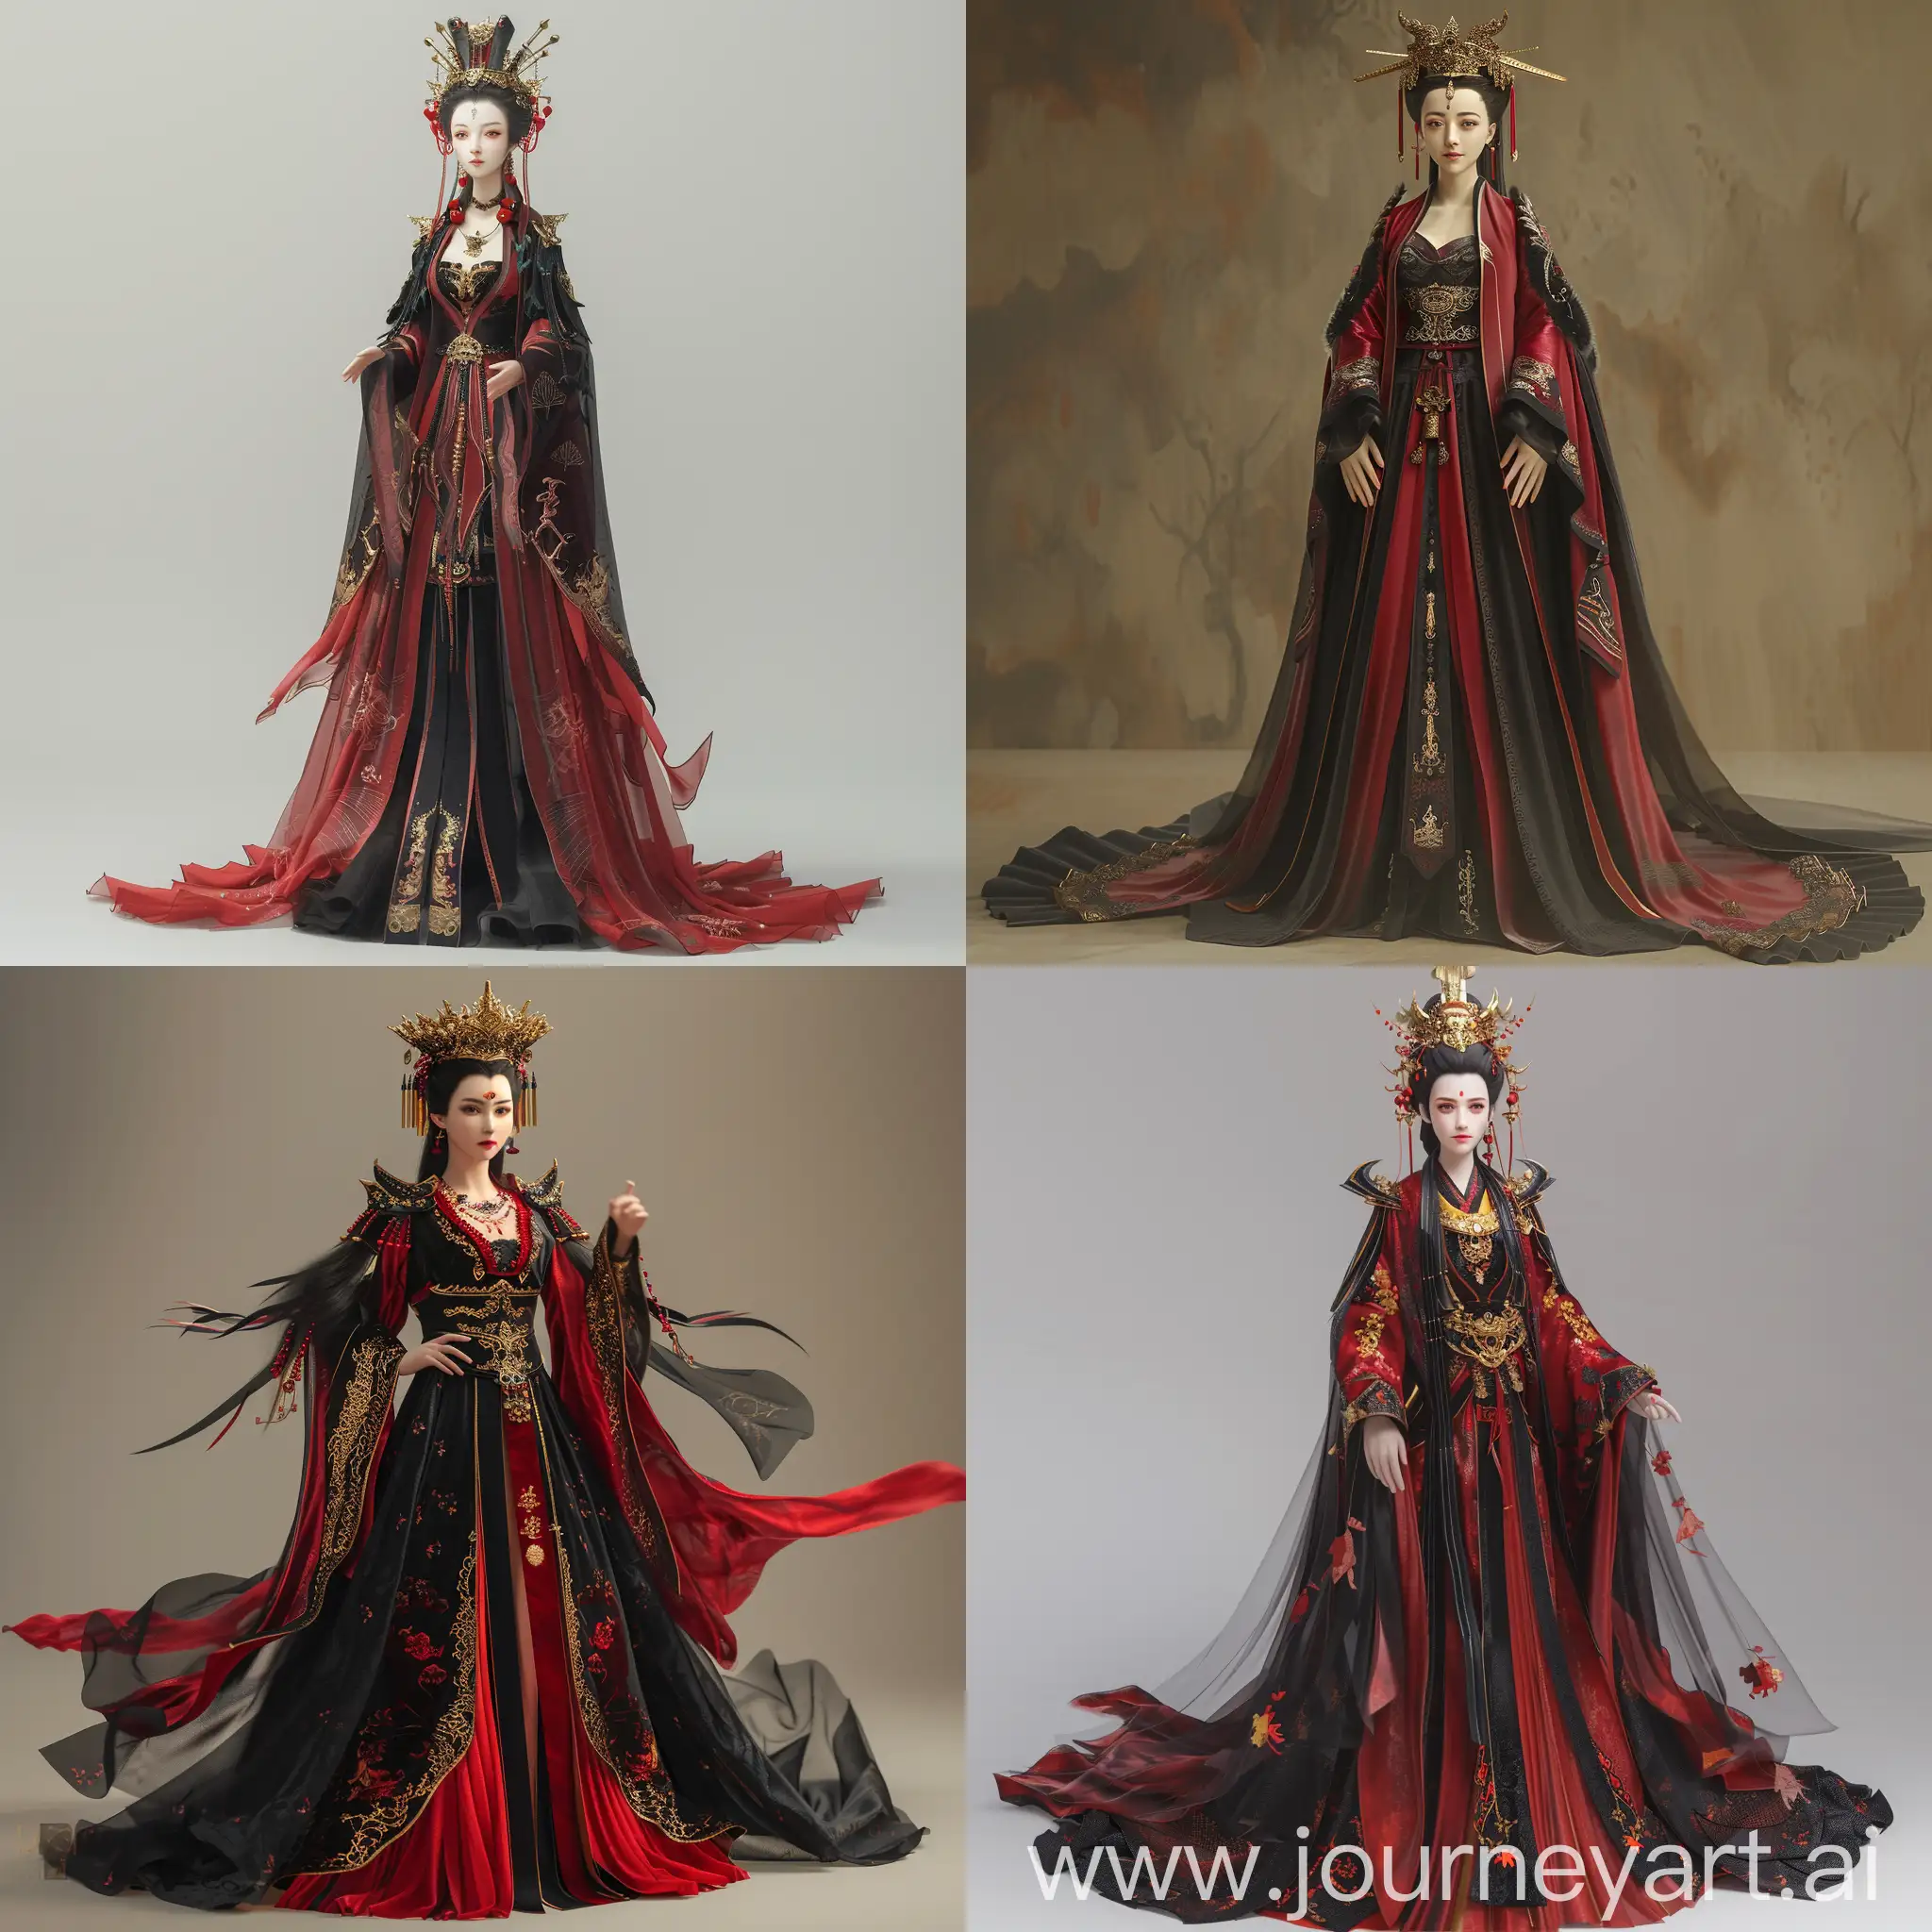 Dominating-Chinese-Empress-Wu-Zetian-in-Regal-Red-and-Black-Dress-with-Gold-Crown